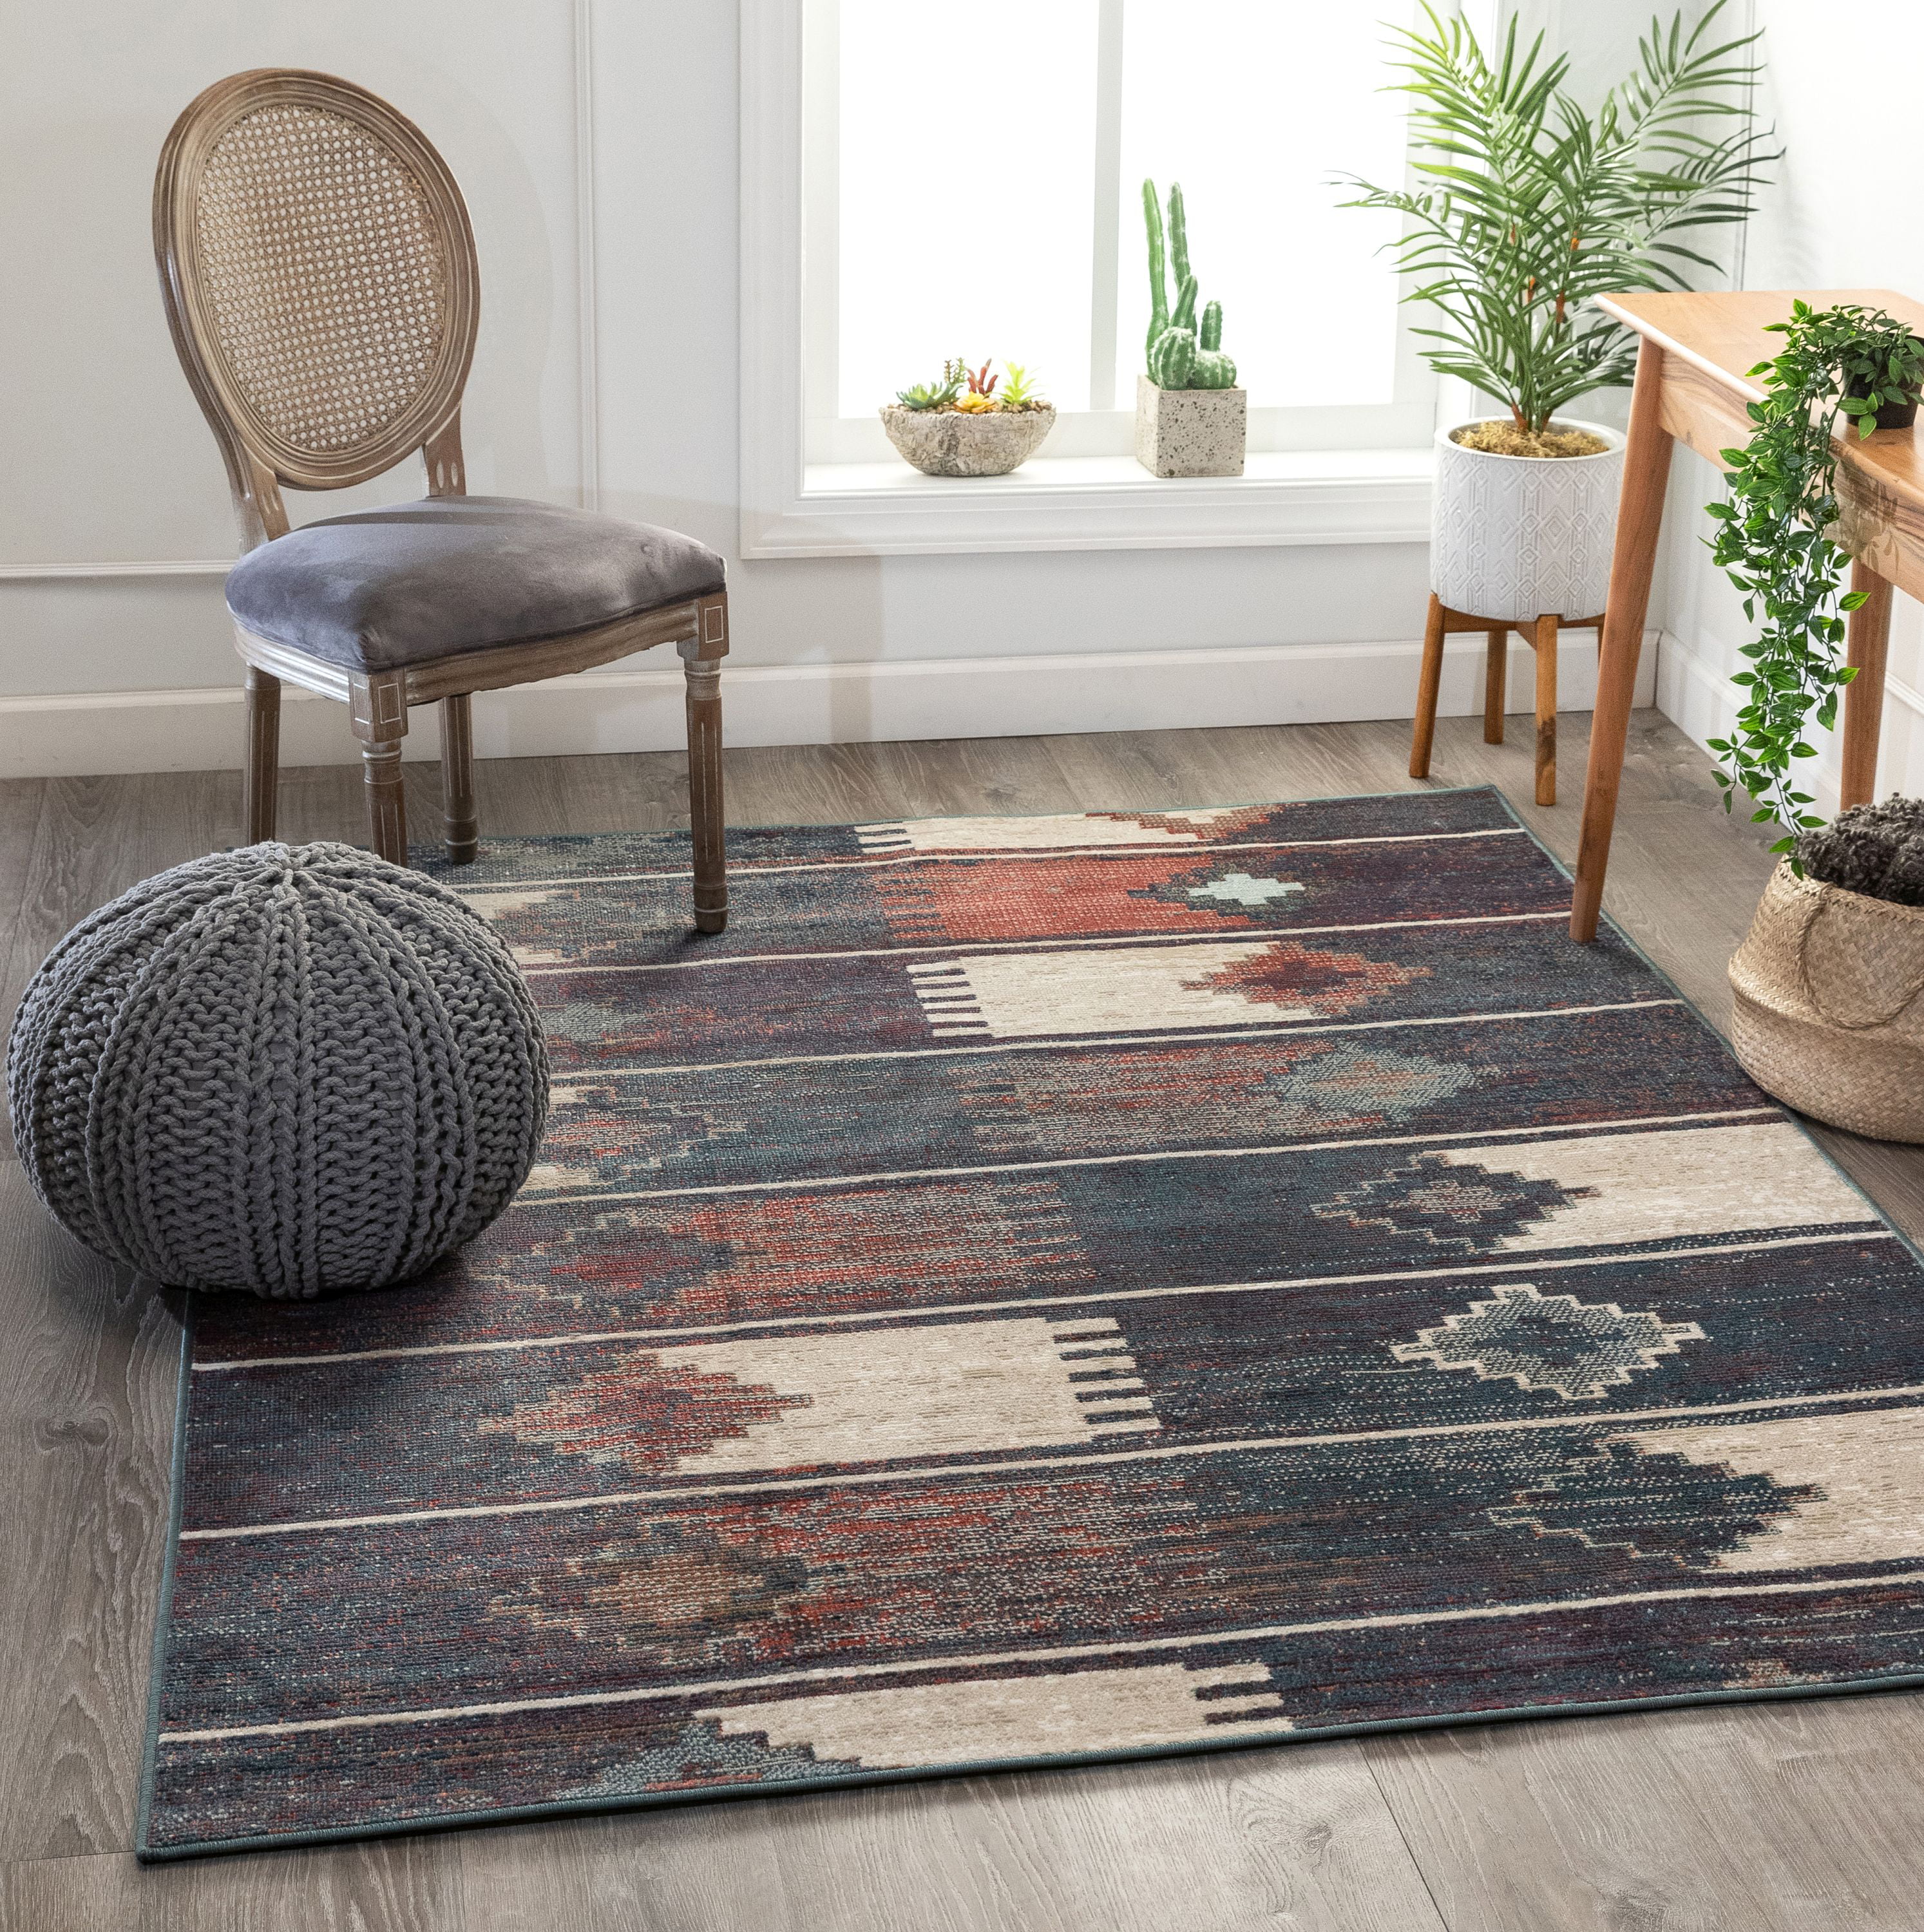 Well Woven Santo Blue Tribal Patchwork, Tribal Pattern Area Rugs